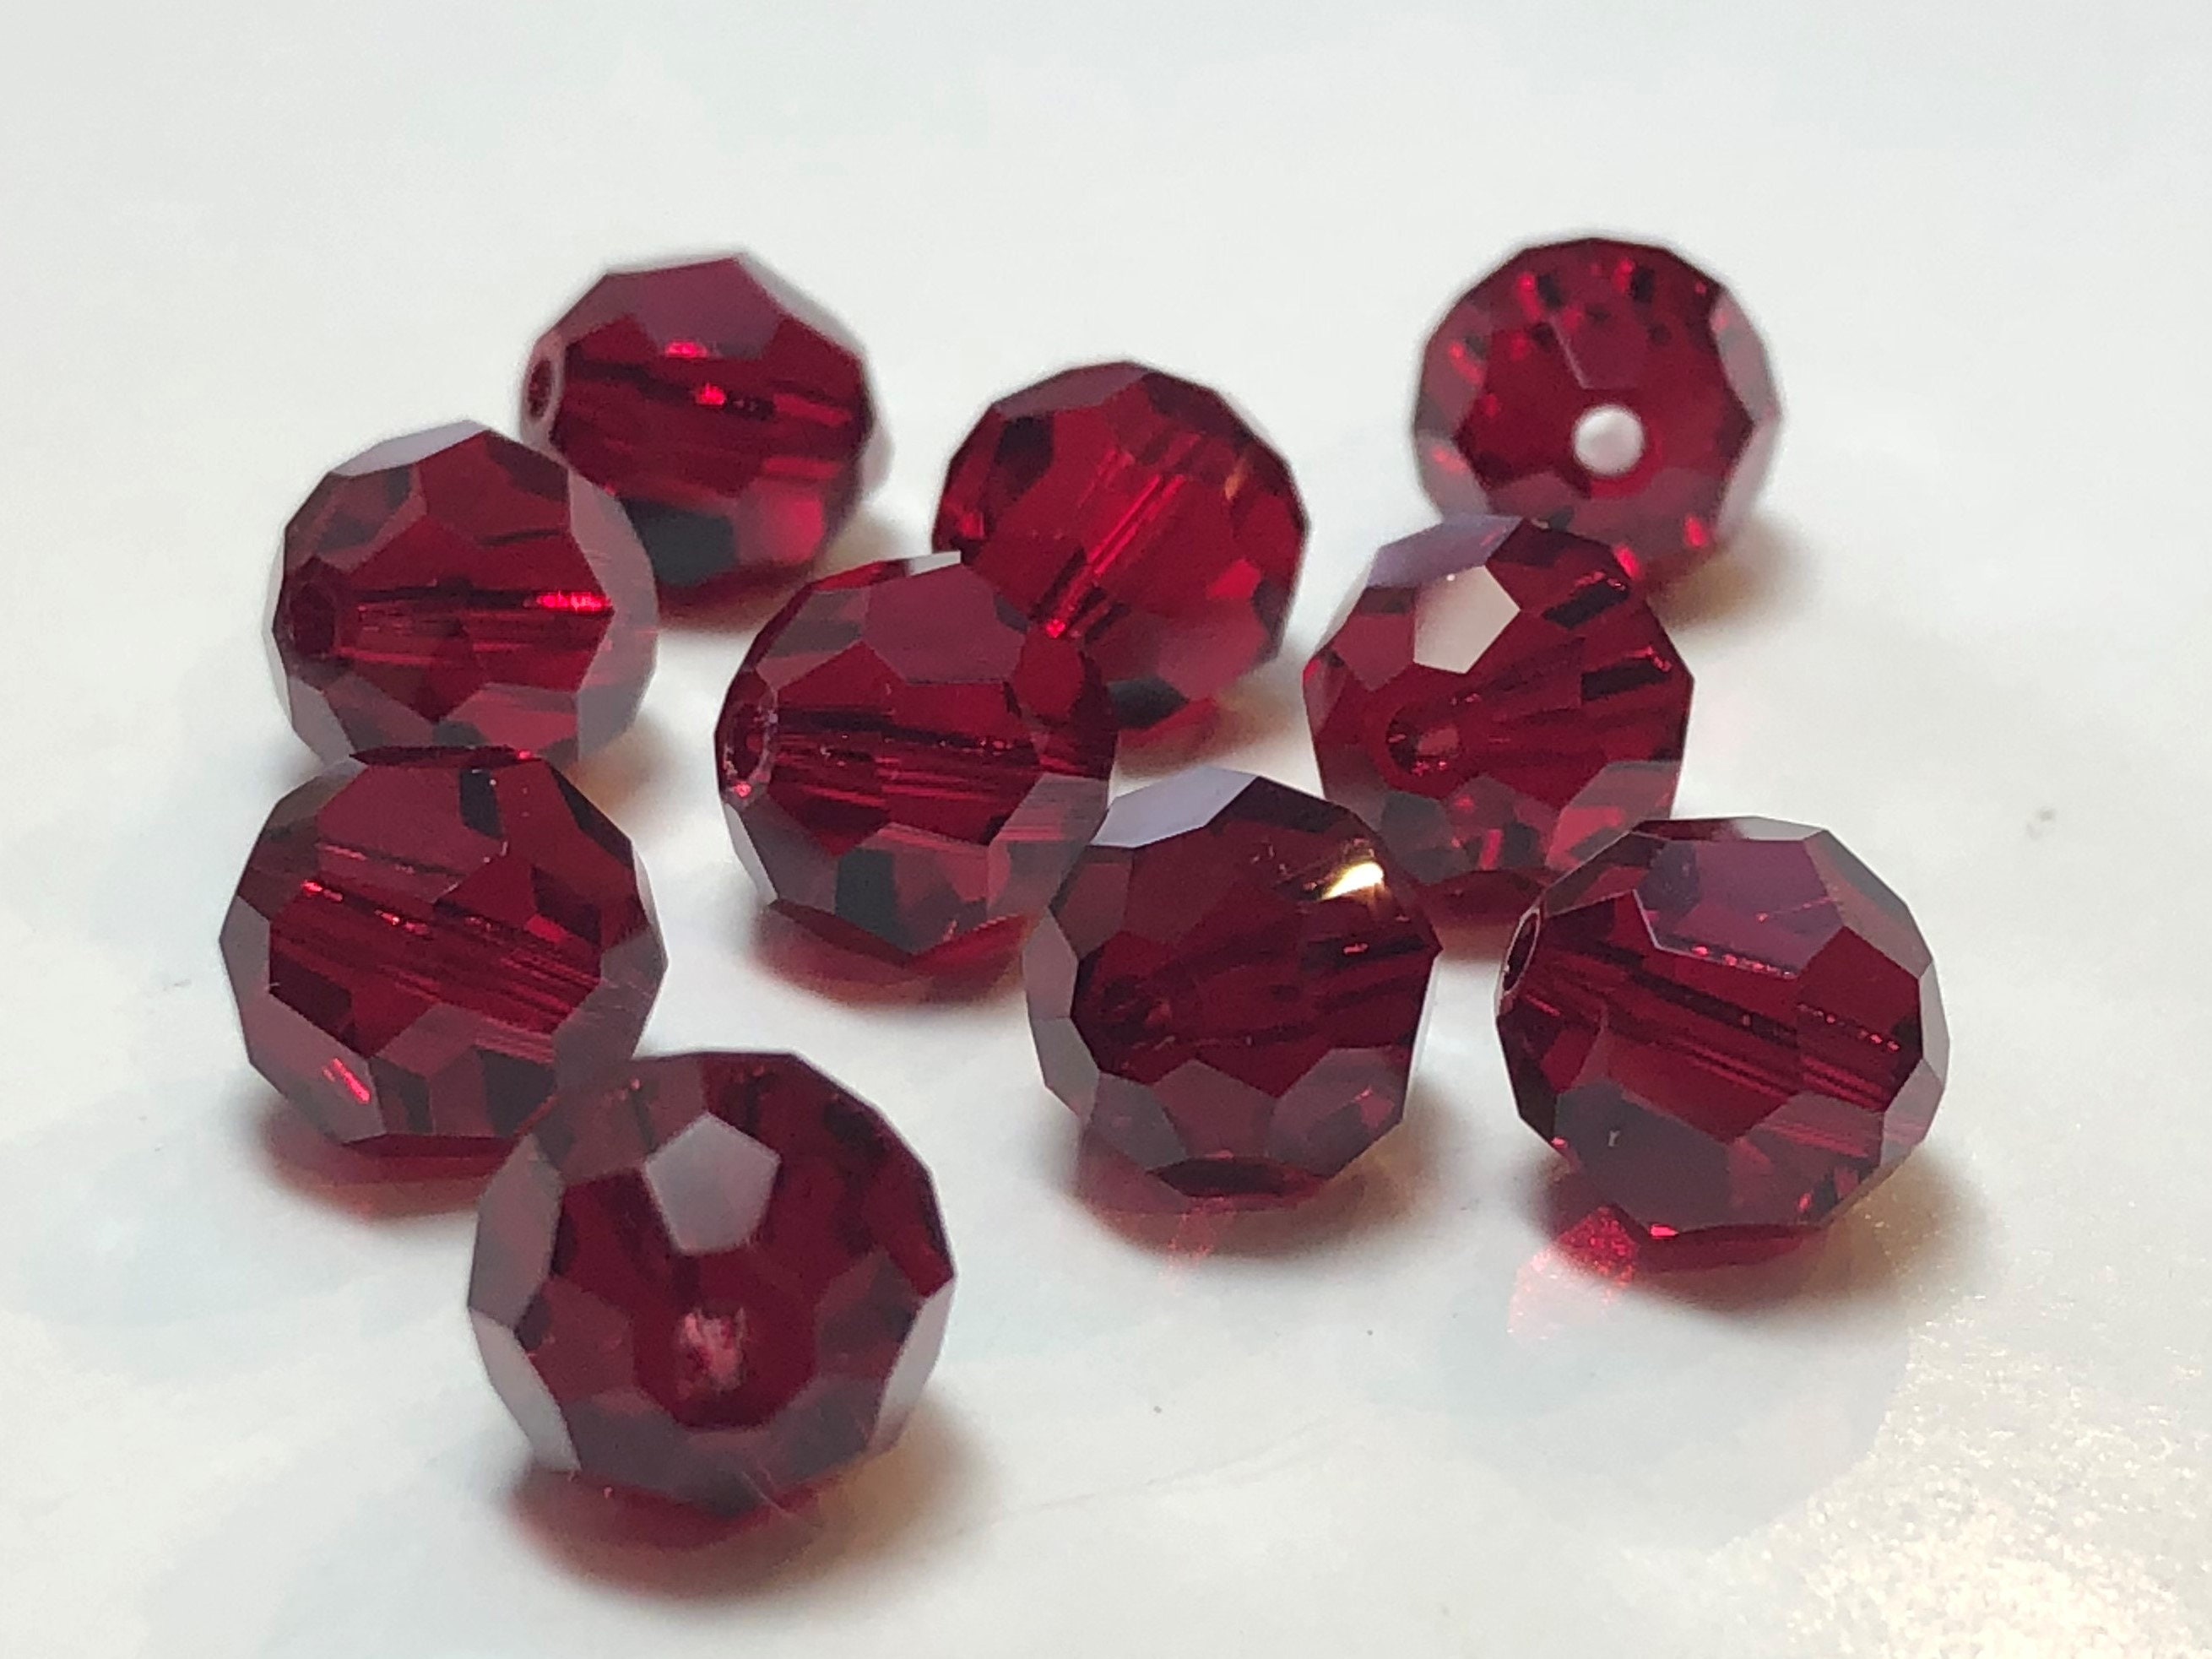 Crystal 8x10mm Light Siam Red Faceted Coin Beads - 8 inch strand